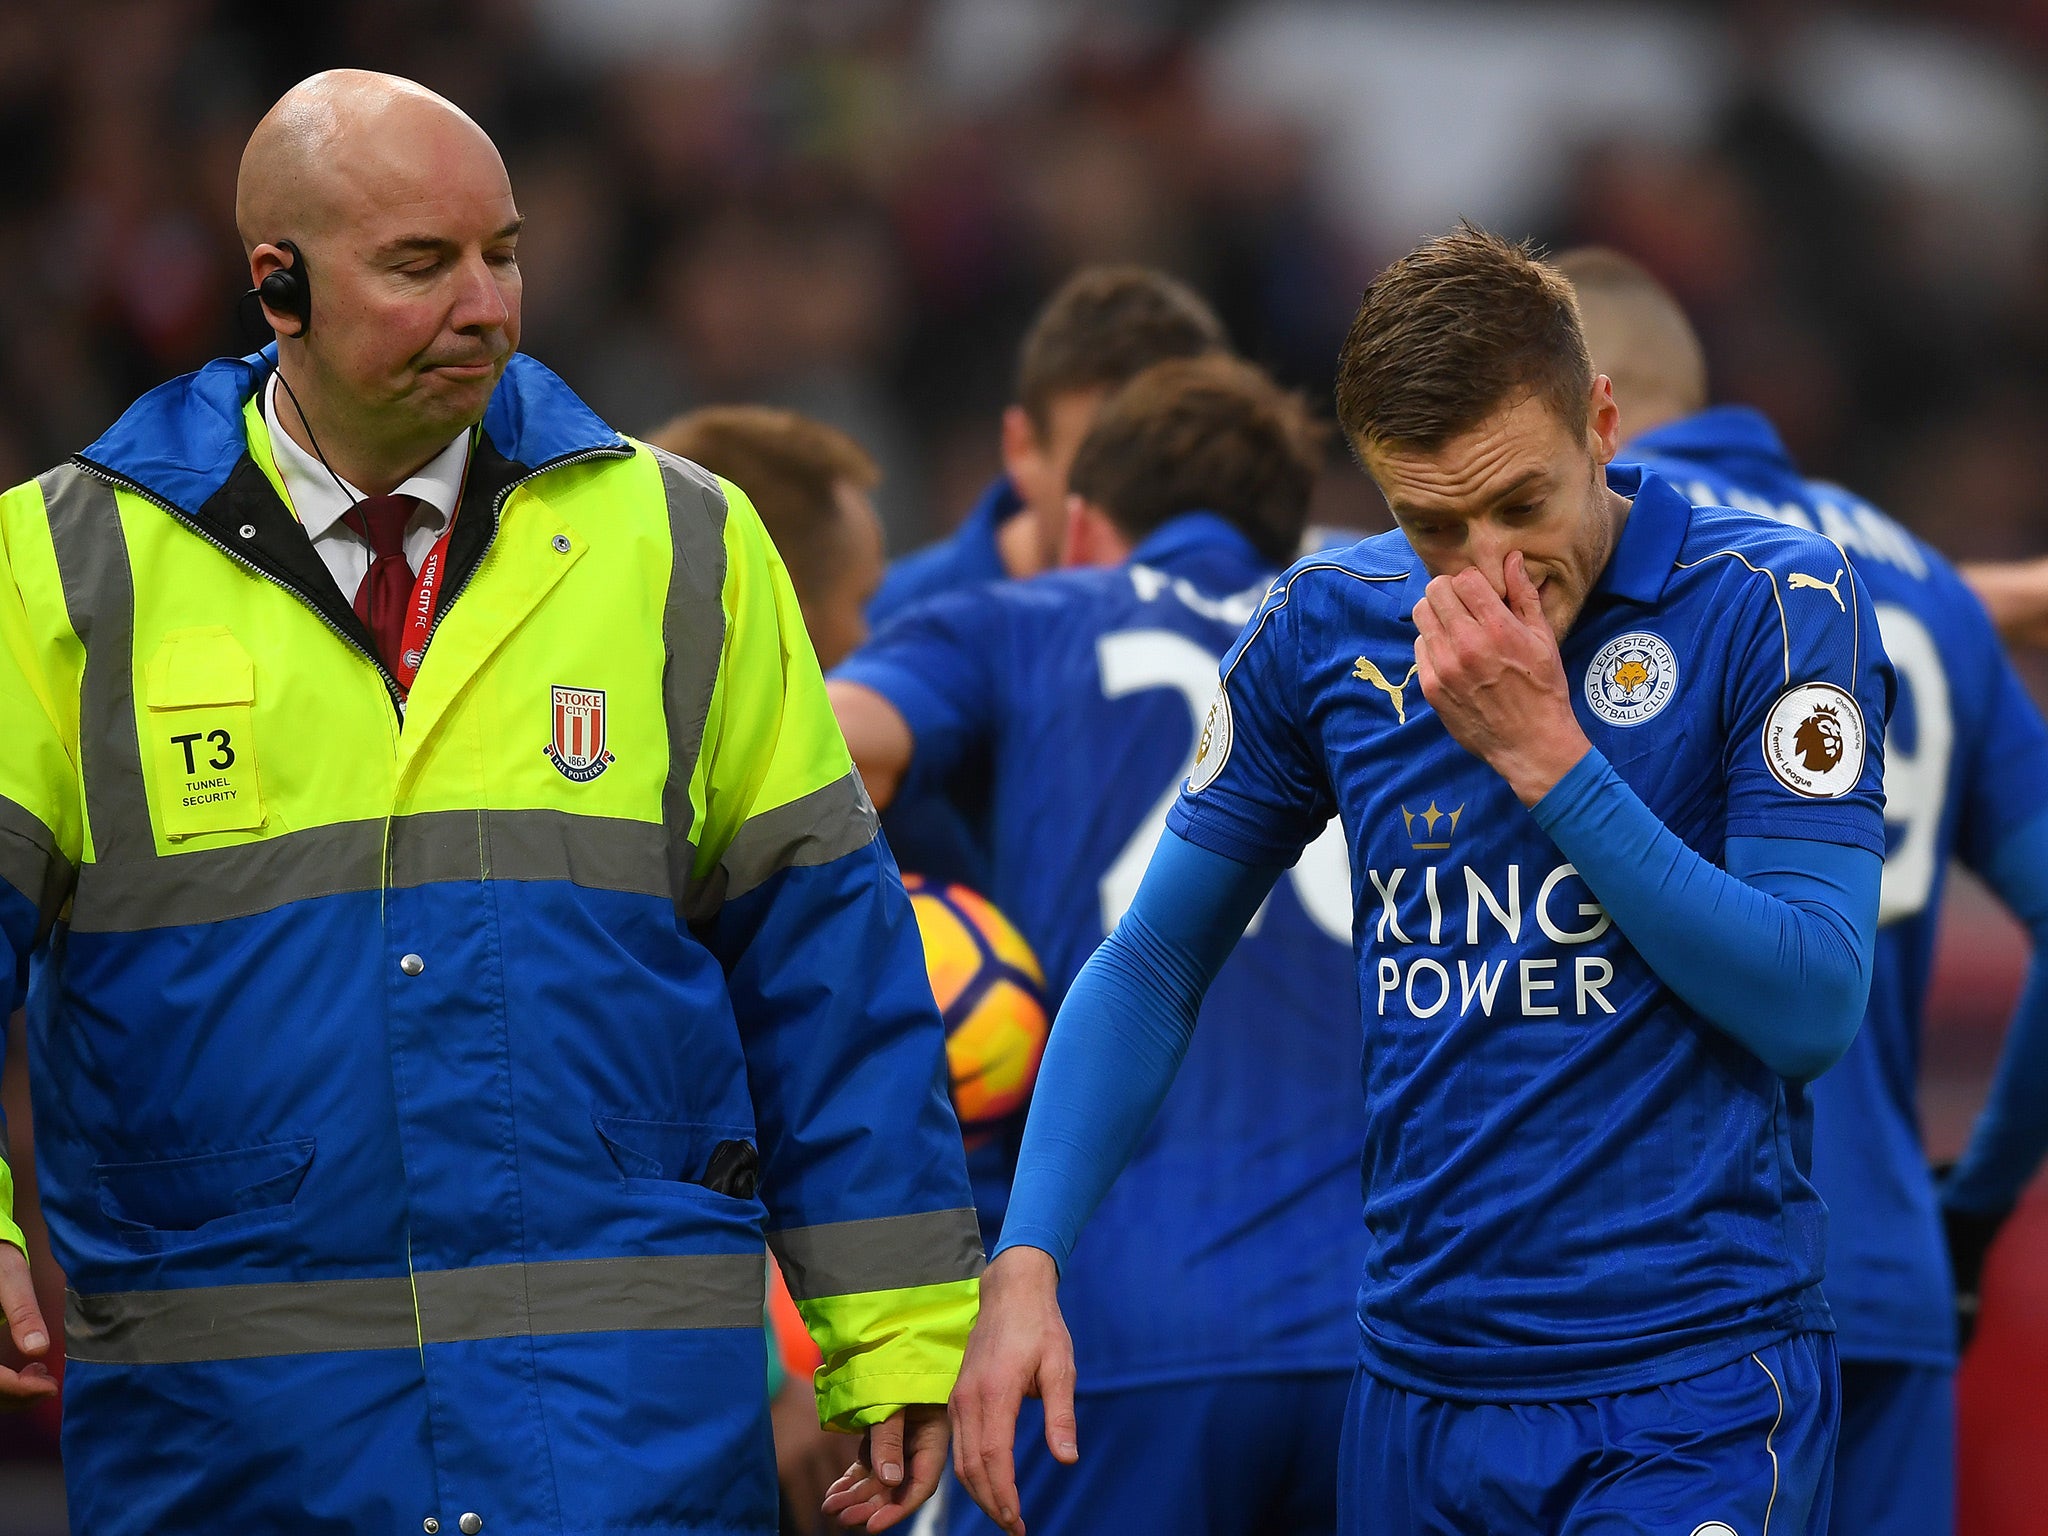 Leicester believe that Vardy was forced into the challenge